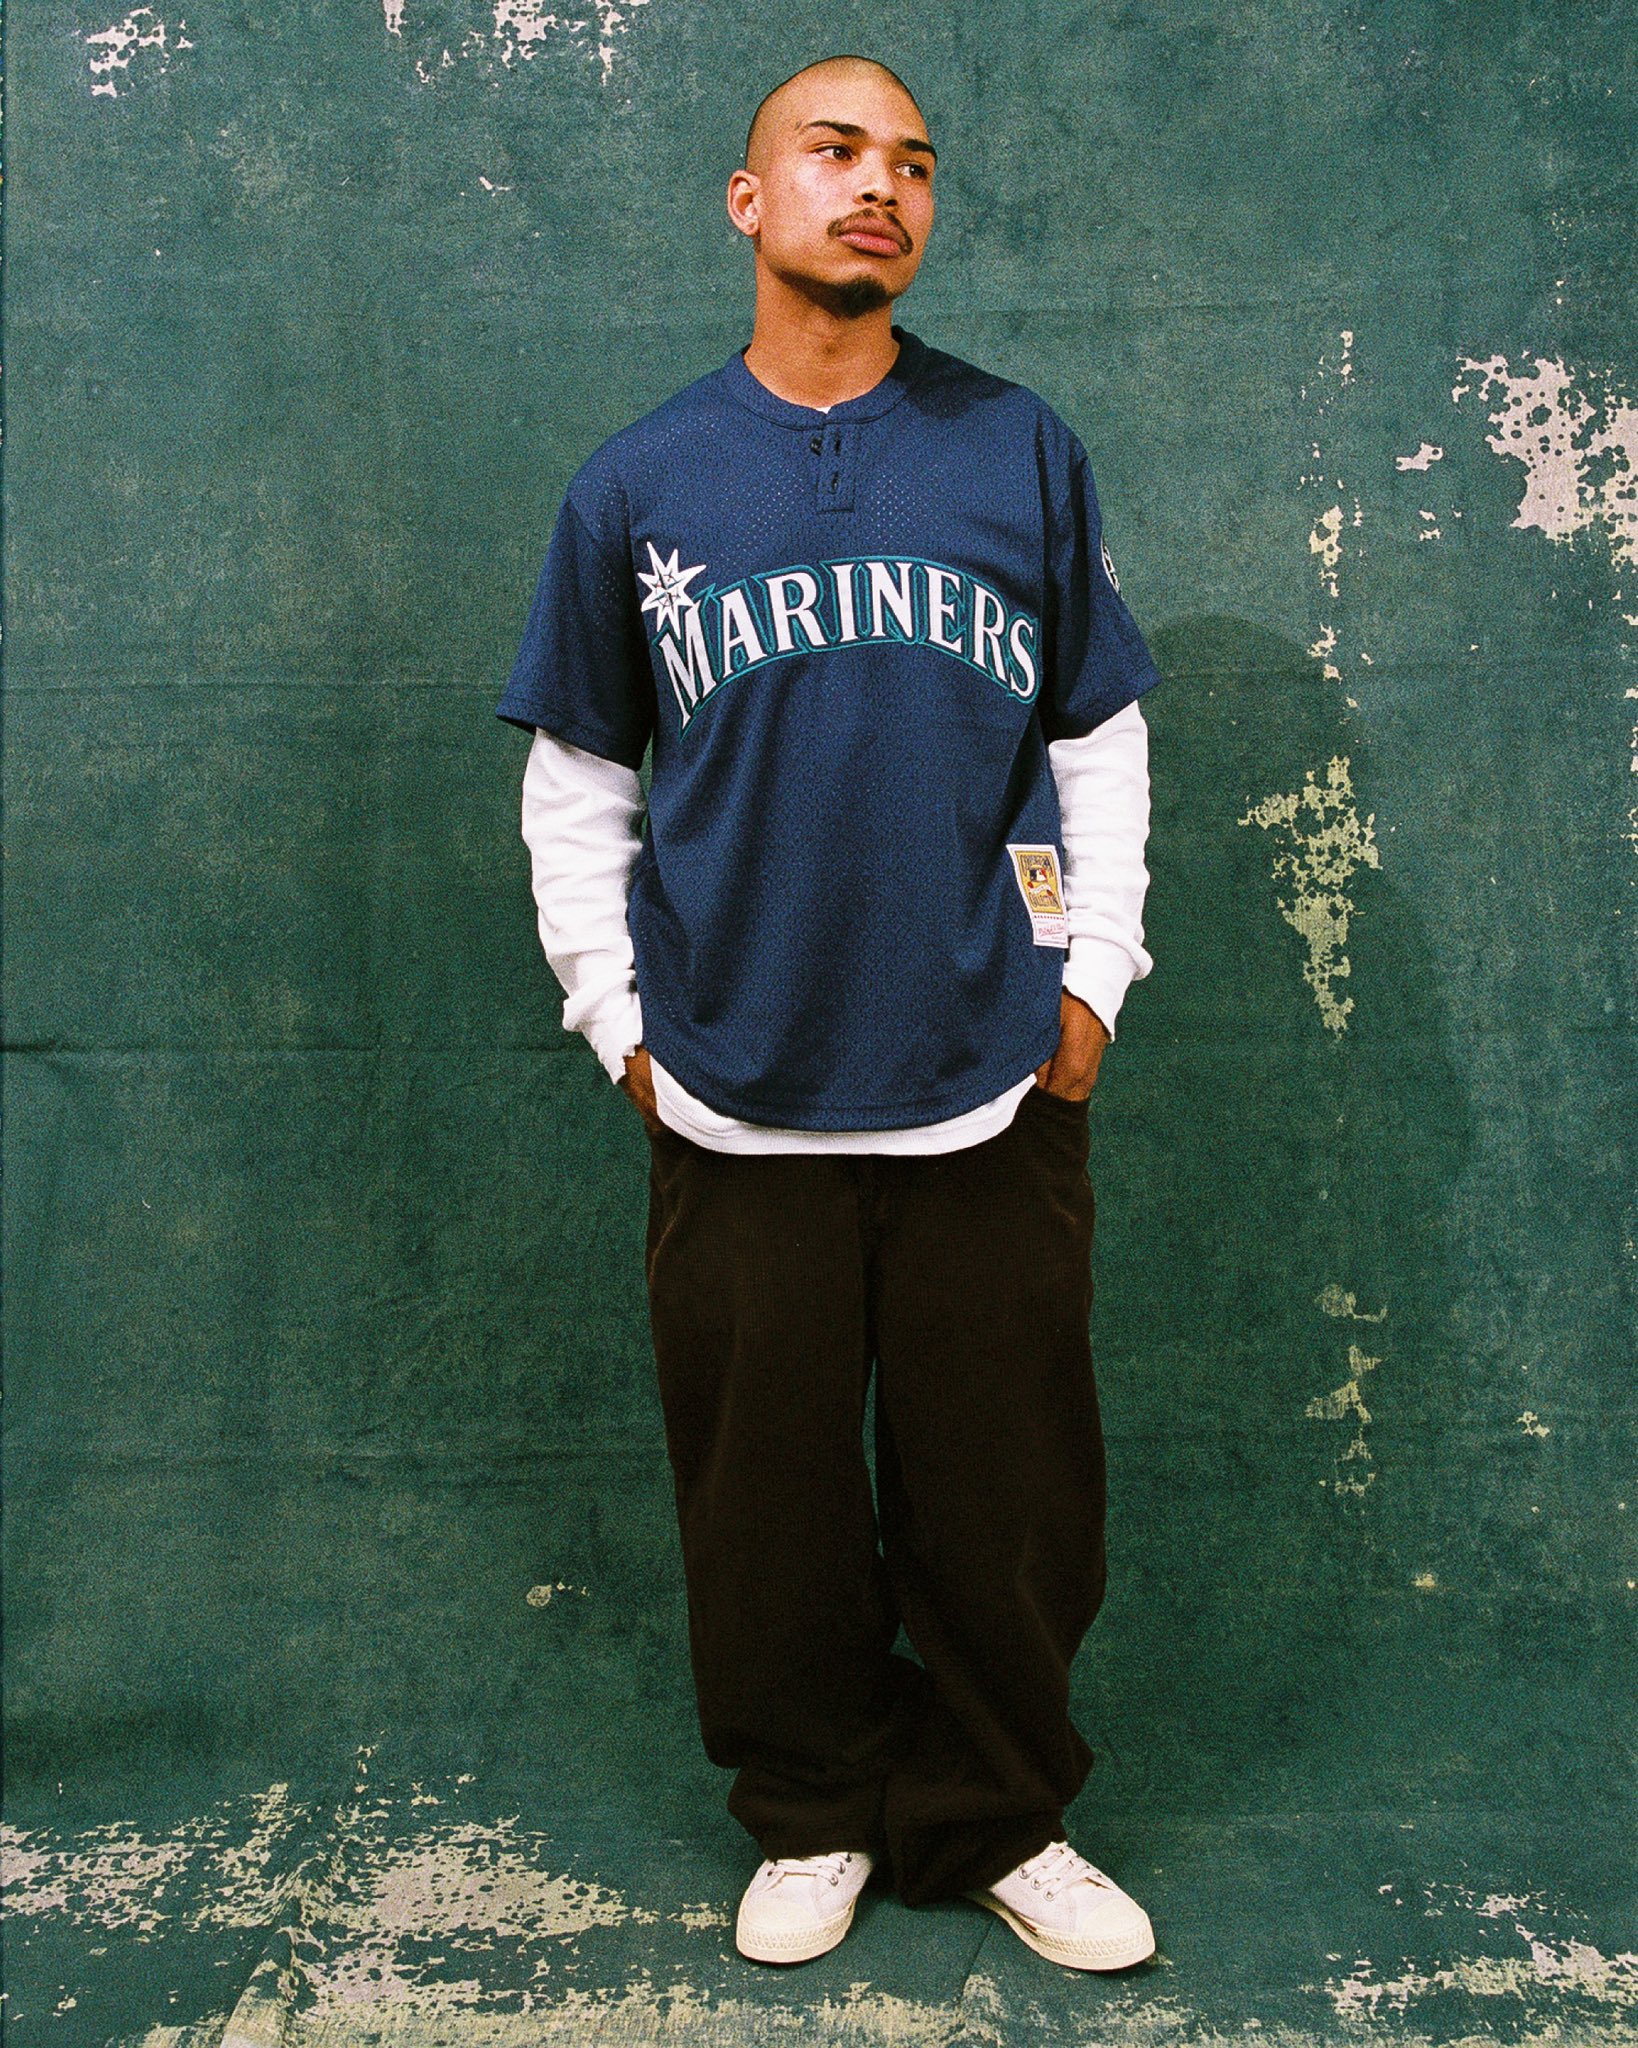 mitchell and ness mariners jersey